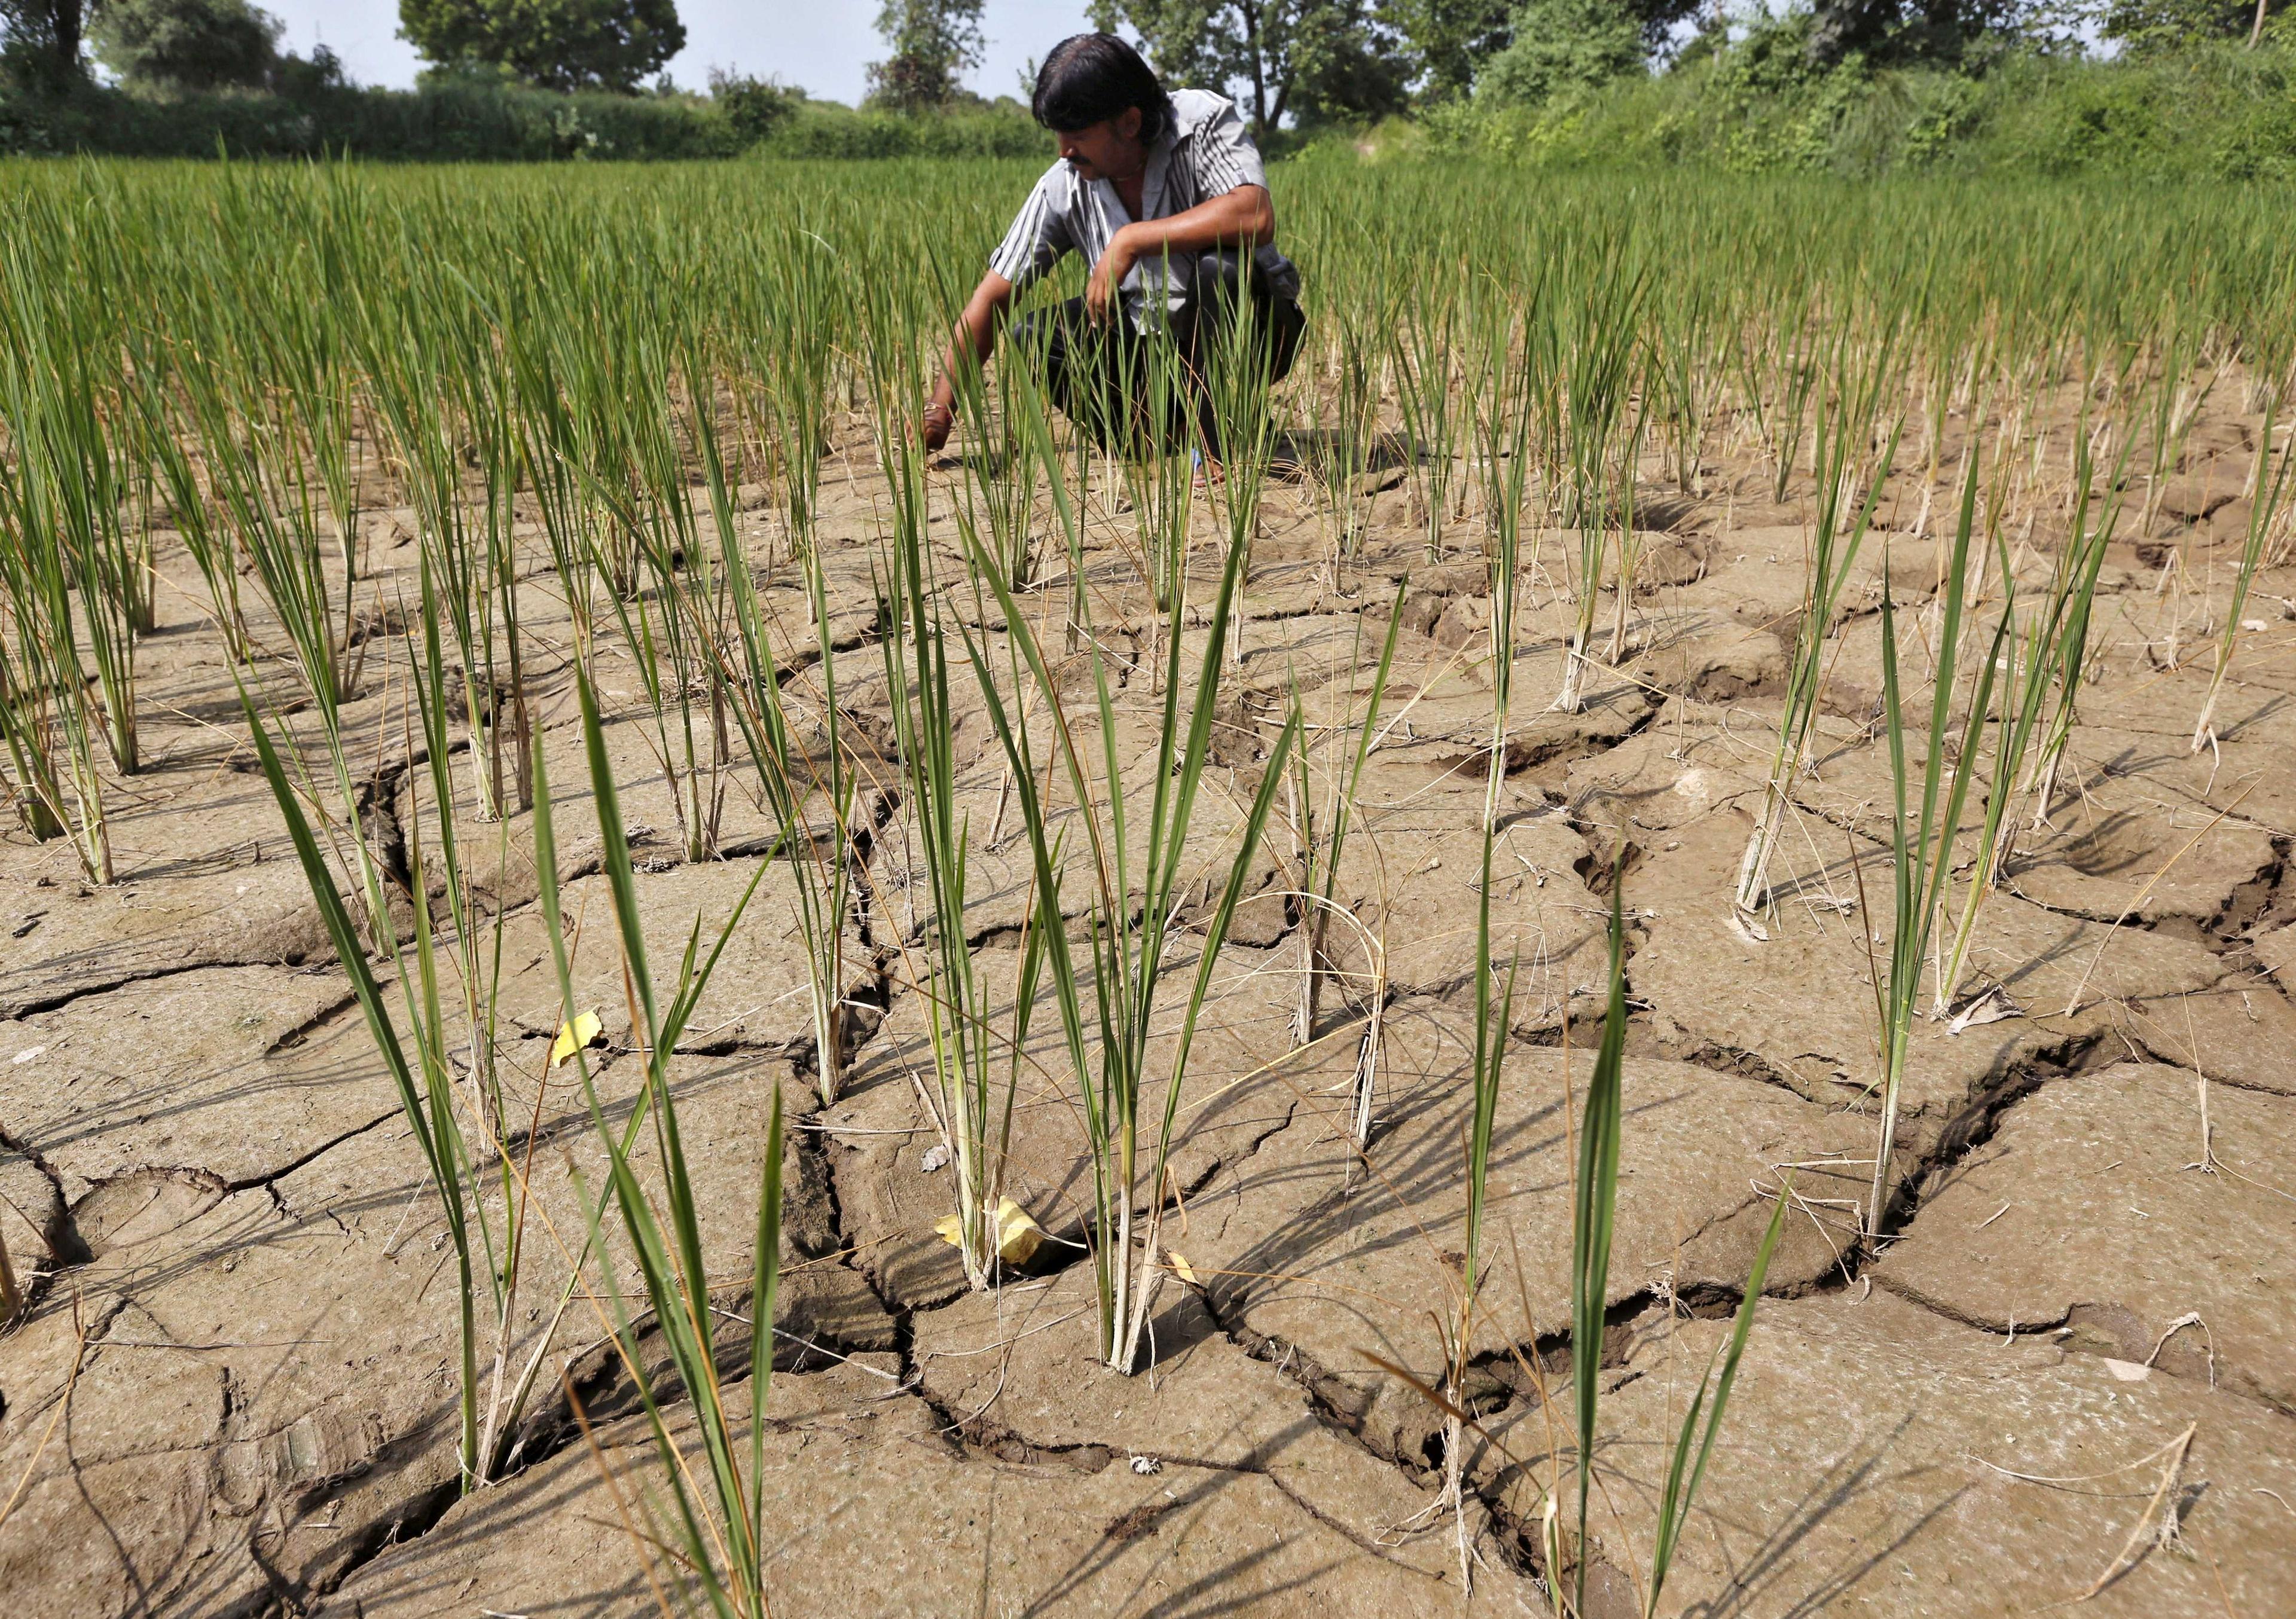 A farmer removes dried plants from his parched paddy field on the outskirts of Ahmedabad, India, Sept 8, 2015. Photo: Reuters